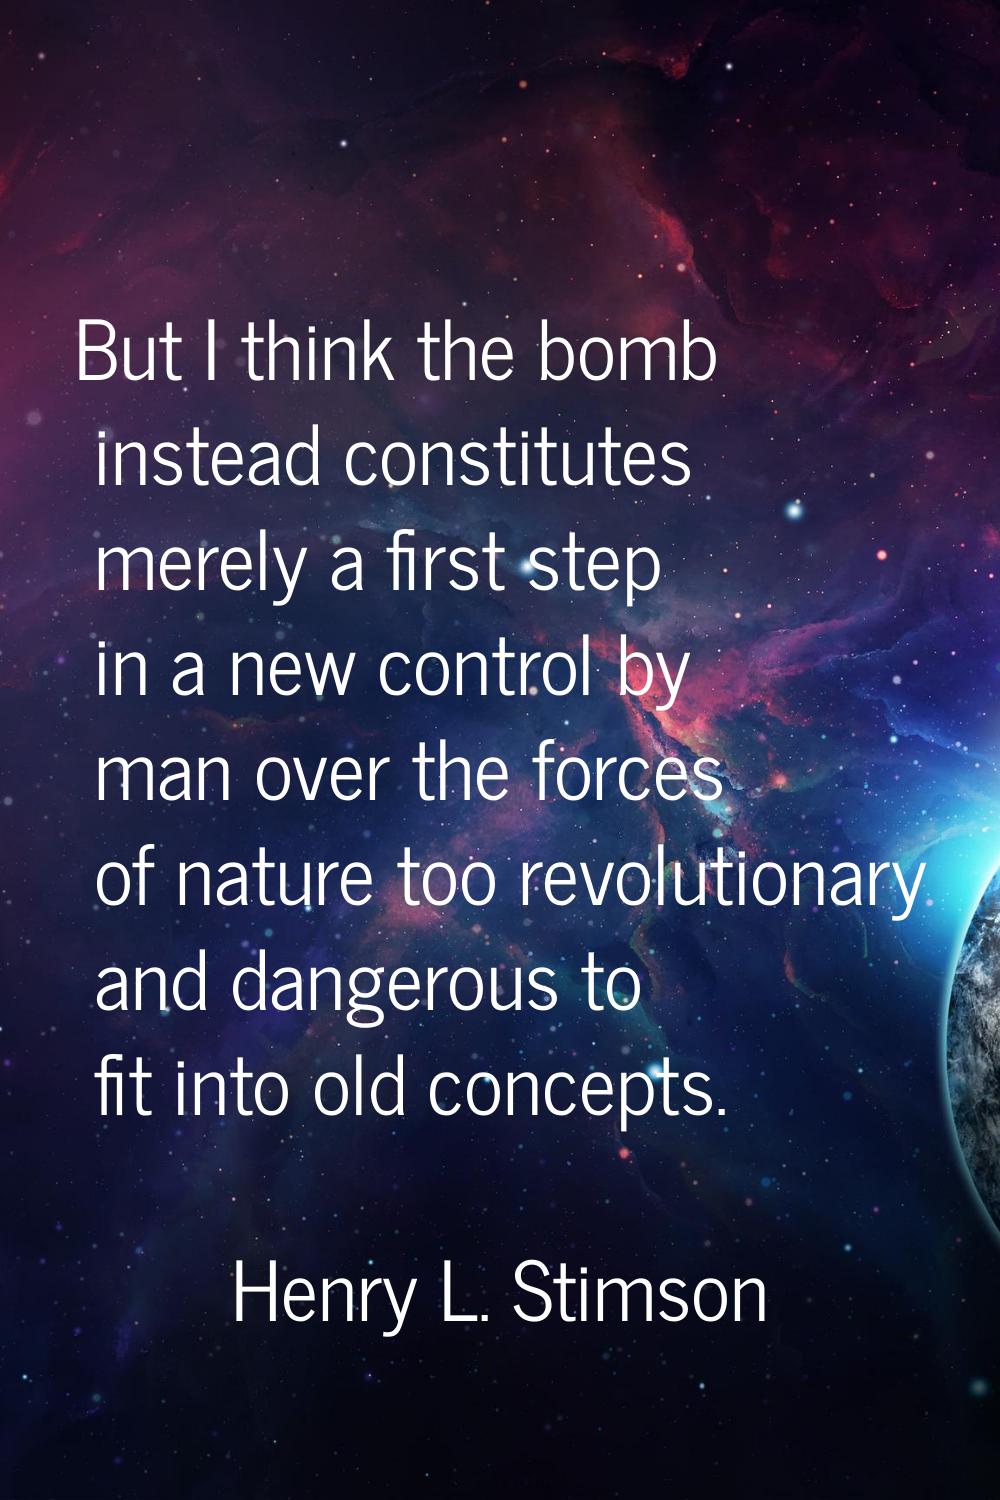 But I think the bomb instead constitutes merely a first step in a new control by man over the force